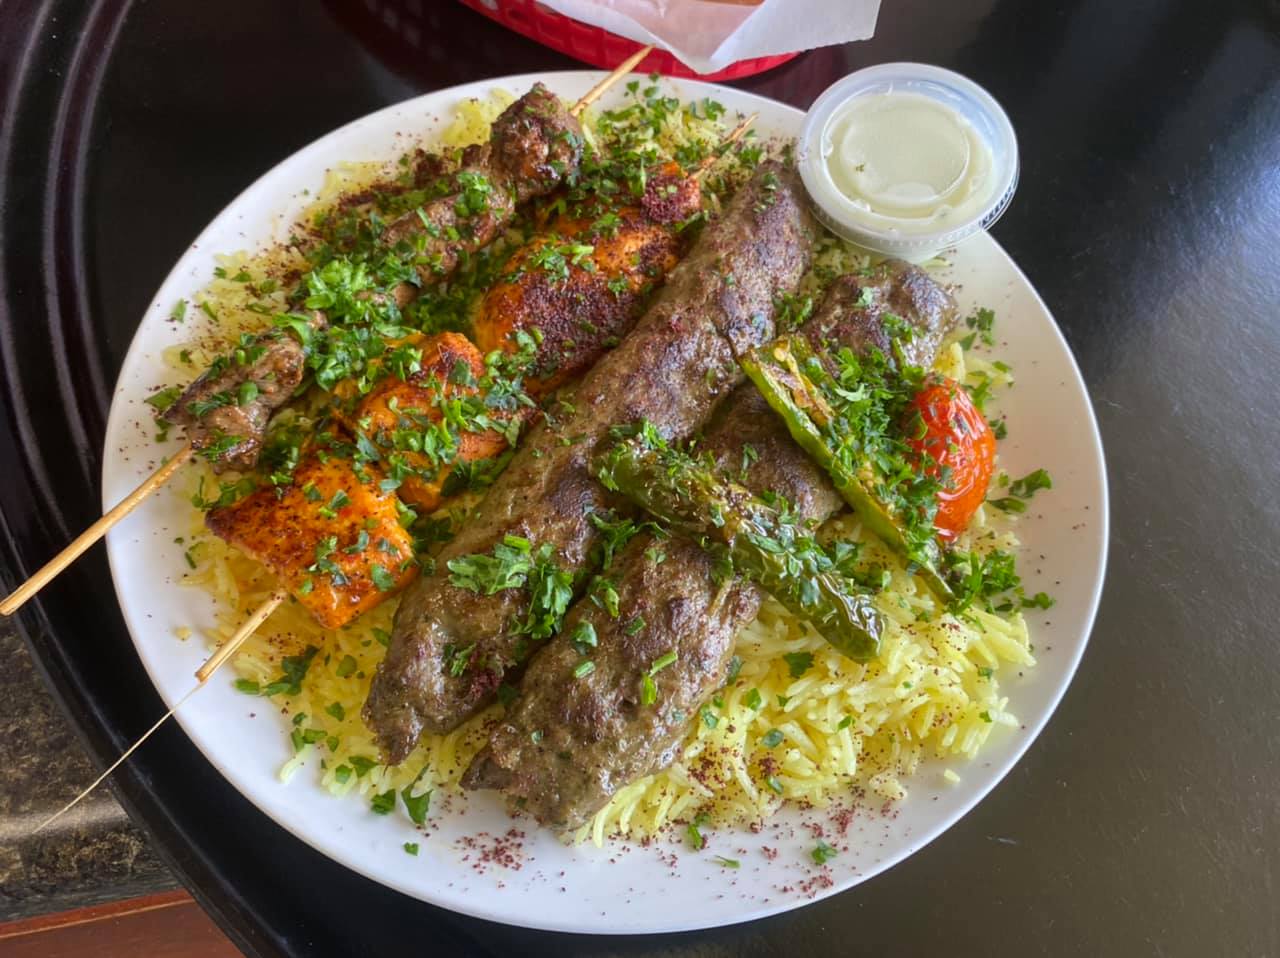 Naf Naf Grill to bring Middle Eastern cuisine to Knoxville